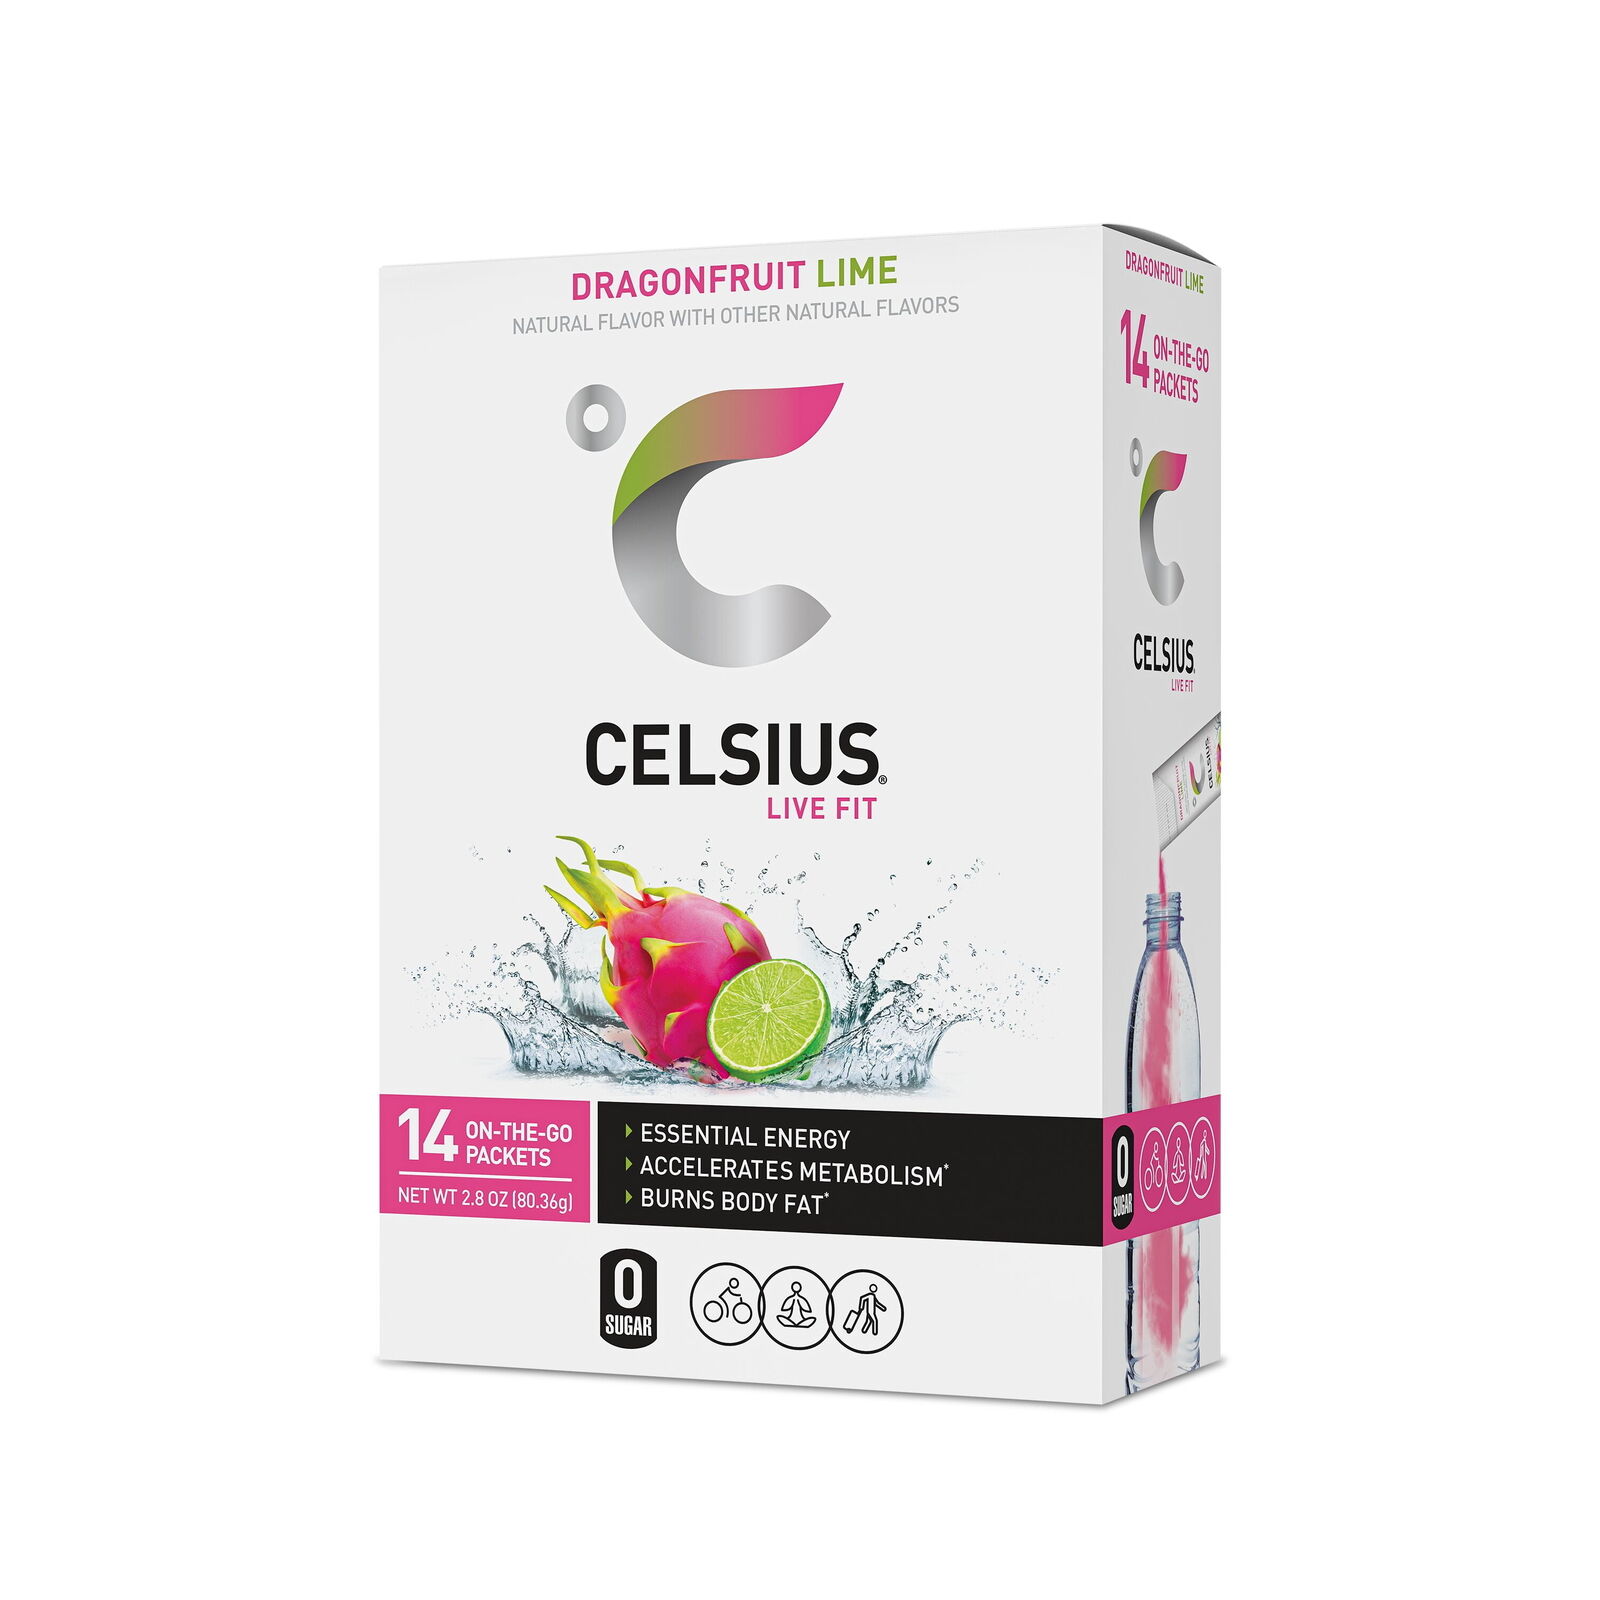 CELSIUS on-the-go Essential Energy Drink Mix, Dragonfruit Lime (14 Stick Pack)..